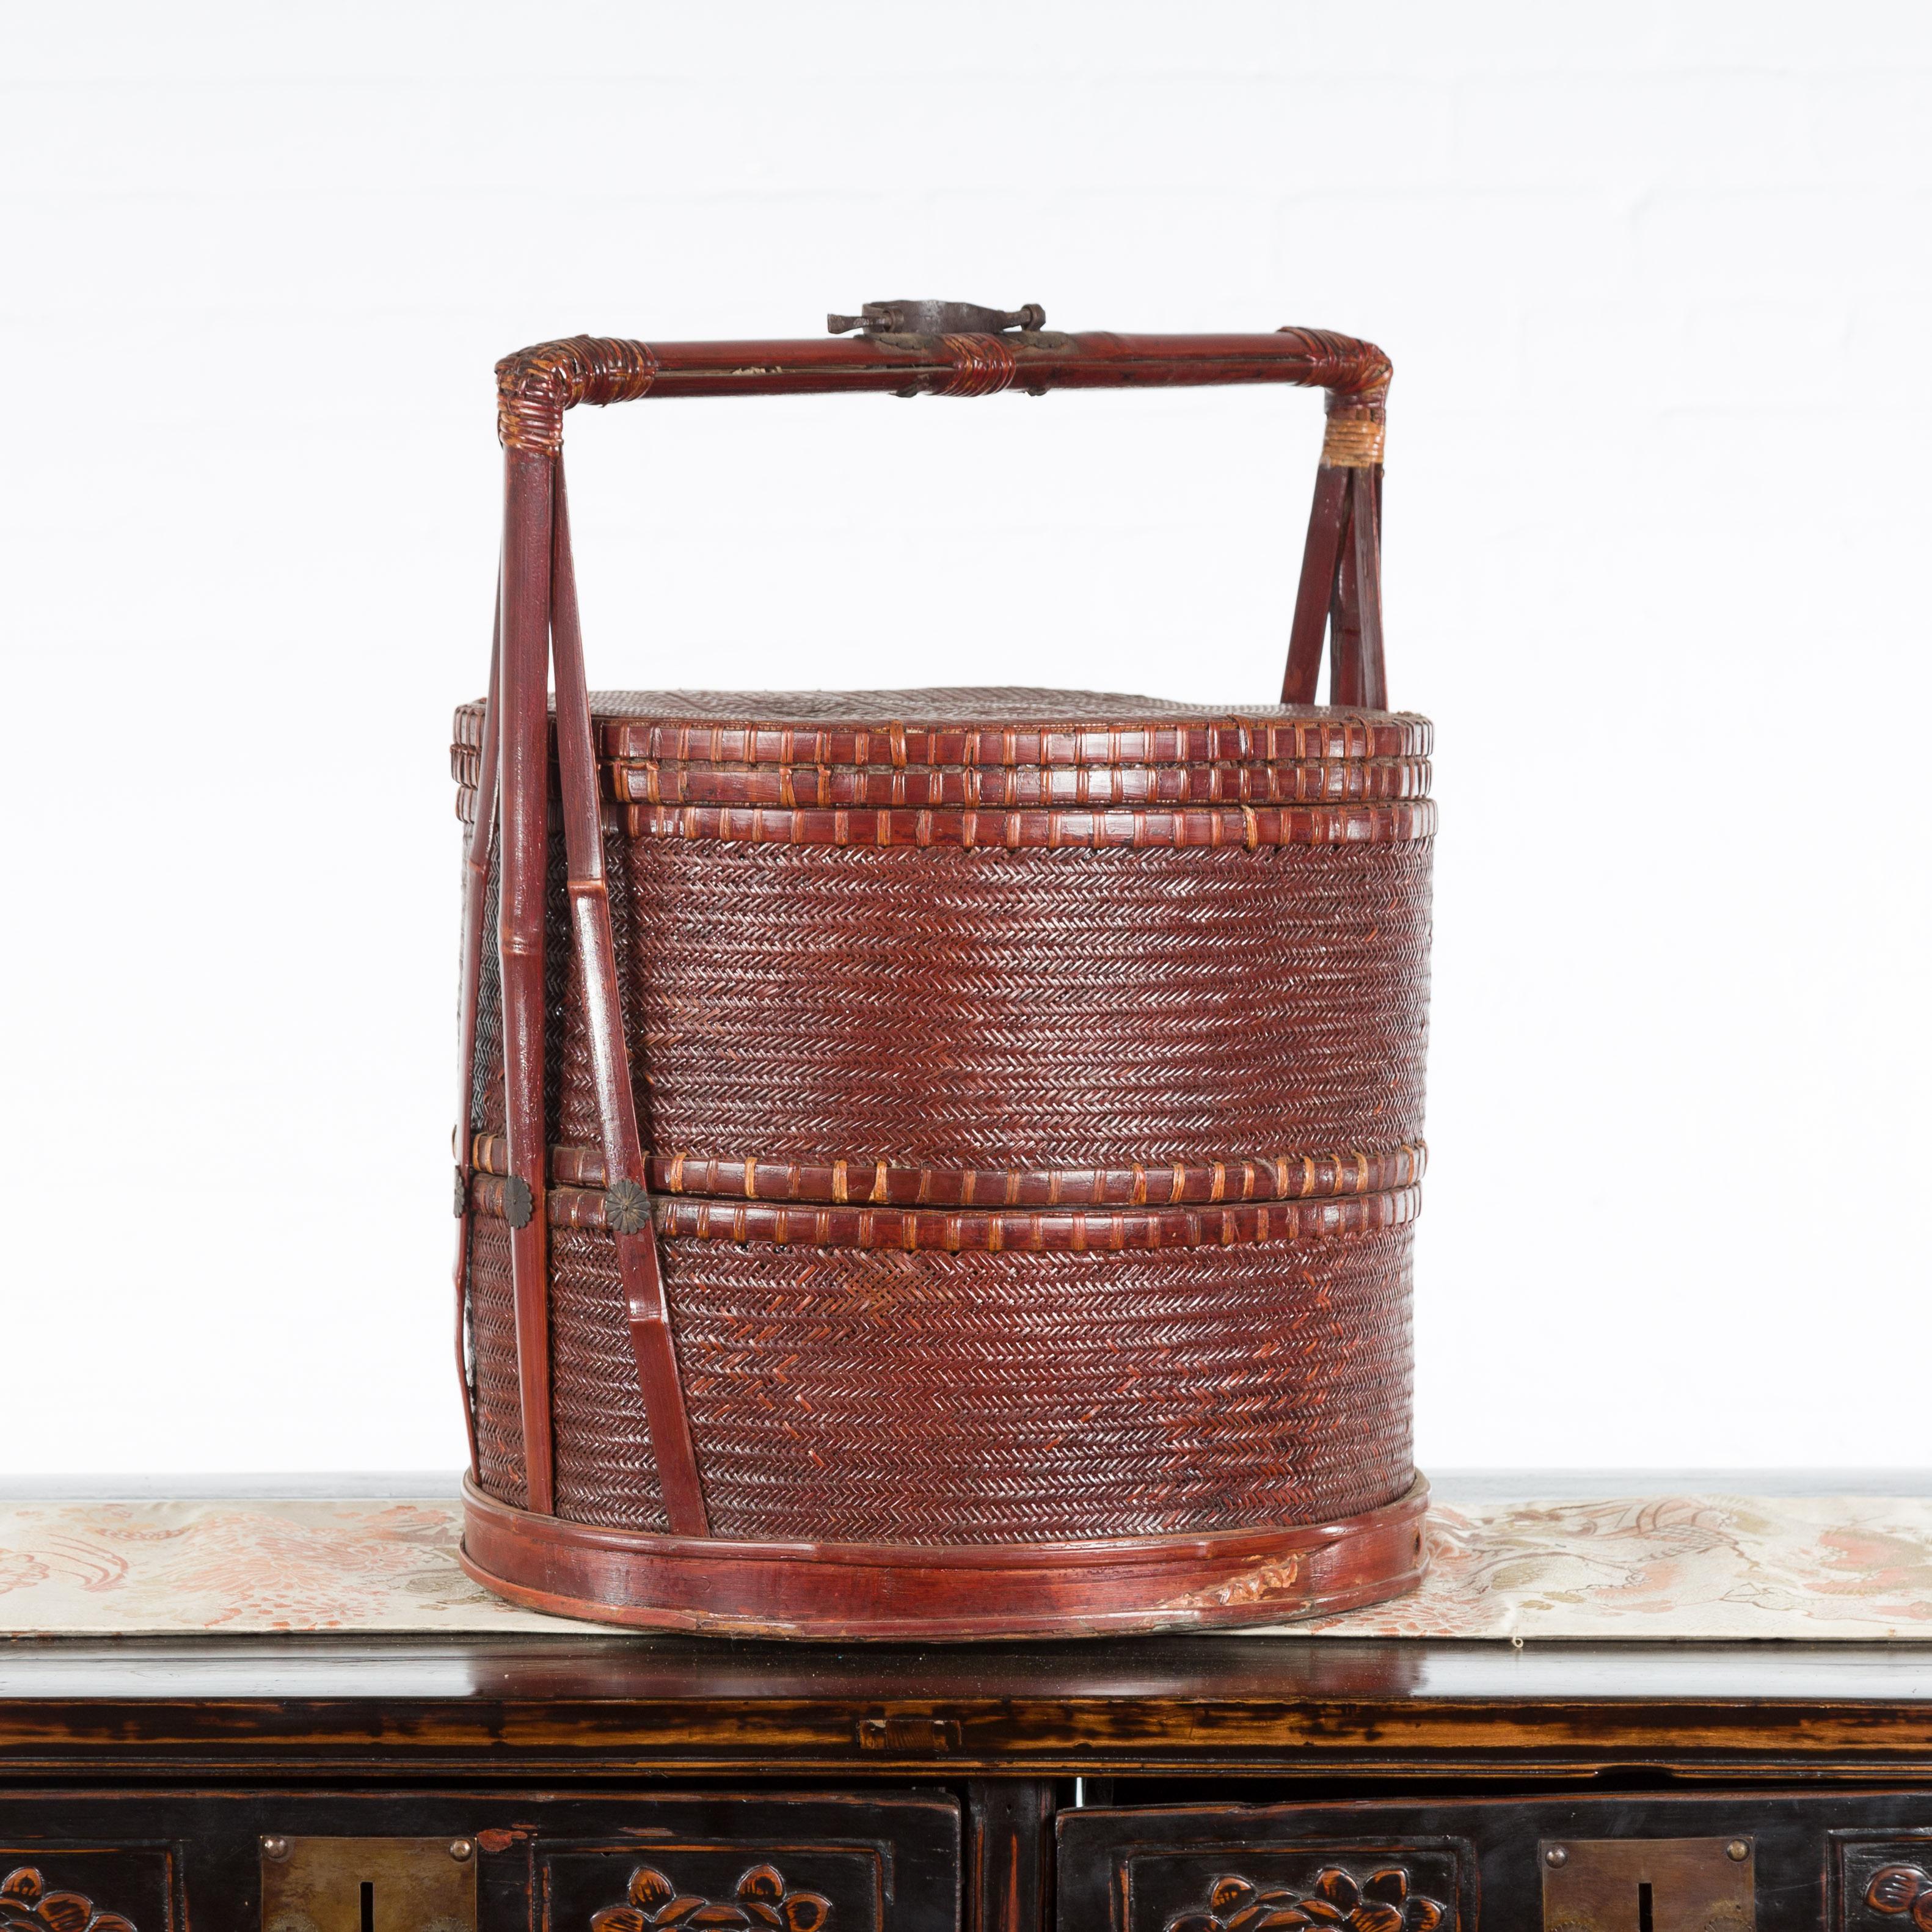 A Chinese vintage woven rattan carrying basket from the mid 20th century, with bamboo handle. Created in China during the midcentury period, this woven rattan carrying basket features a circular lid sitting above two independent sections. The basket